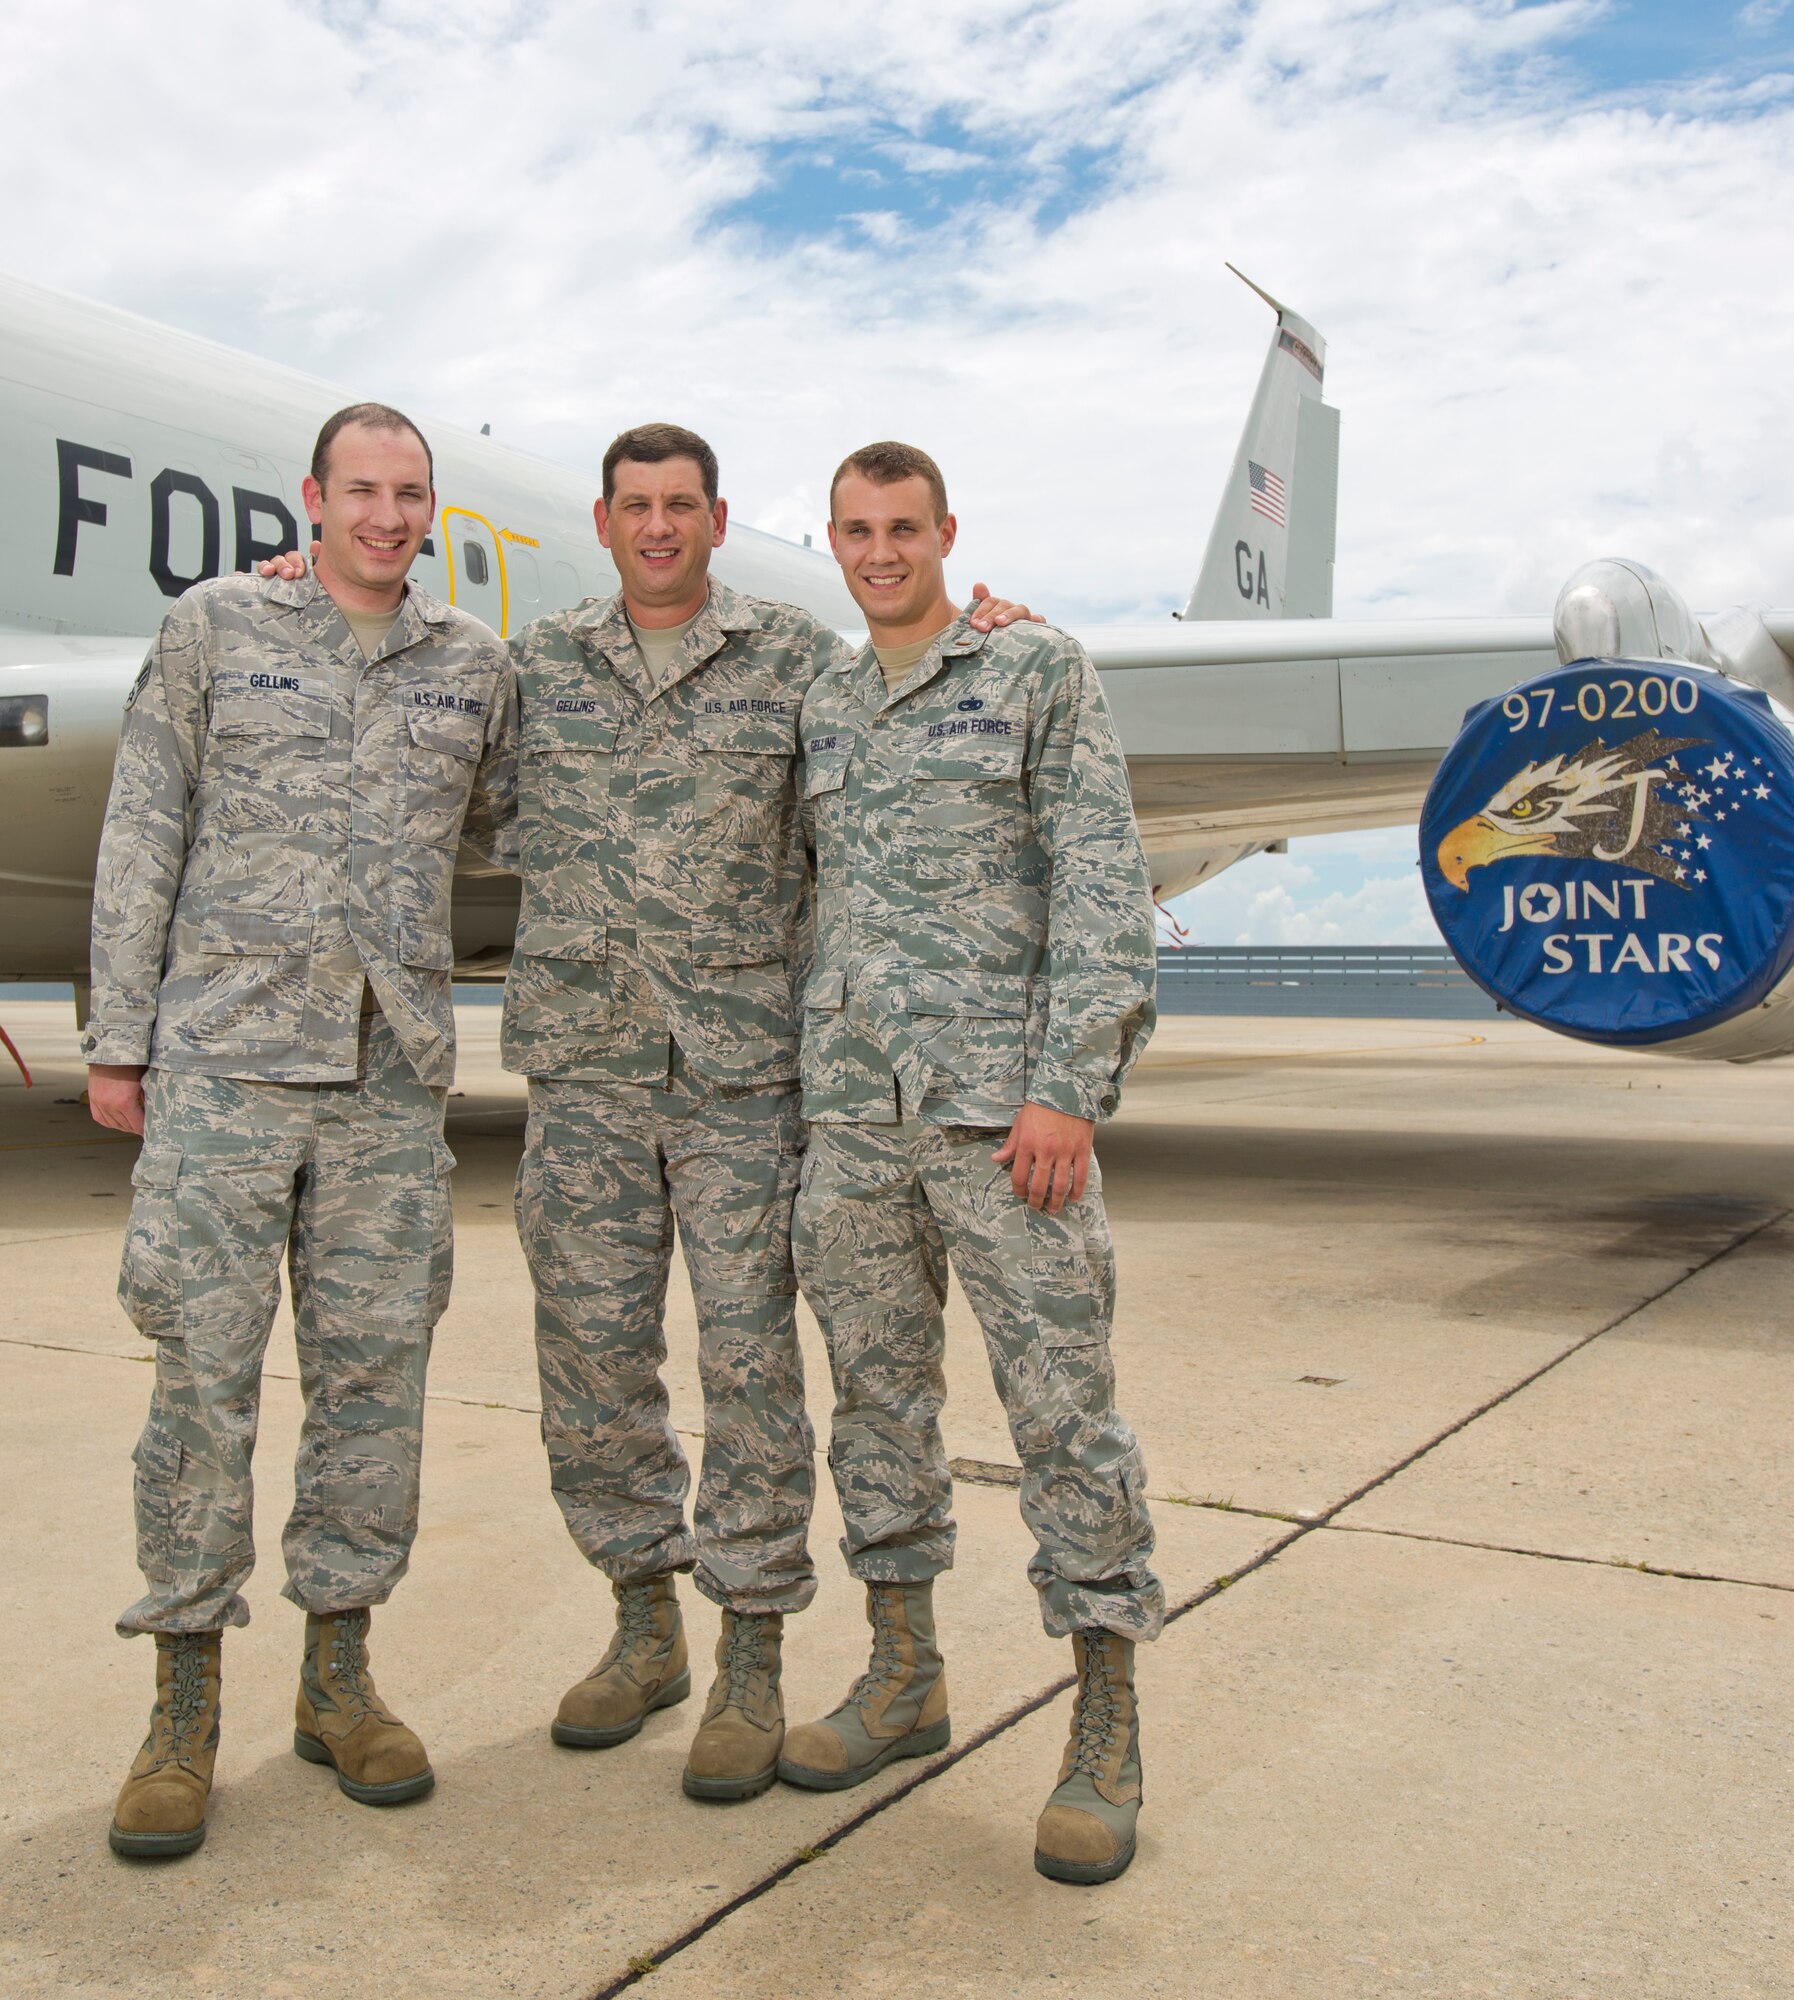 Master Sgt. Kenneth Gellins, center, poses with his sons 2nd Lt. Brett Gellins, right, and Senior Airman Casey Gellins, in front of an E-8C Joint STARS, Robins Air Force Base, Ga., July 14, 2013.  The father and sons, who currently serve together in the 116th Air Control Wing, Georgia Air National Guard, have a long history of family members who have served in the military dating back to the Revolutionary War. (Photo by Master Sgt. Roger Parsons/Released)